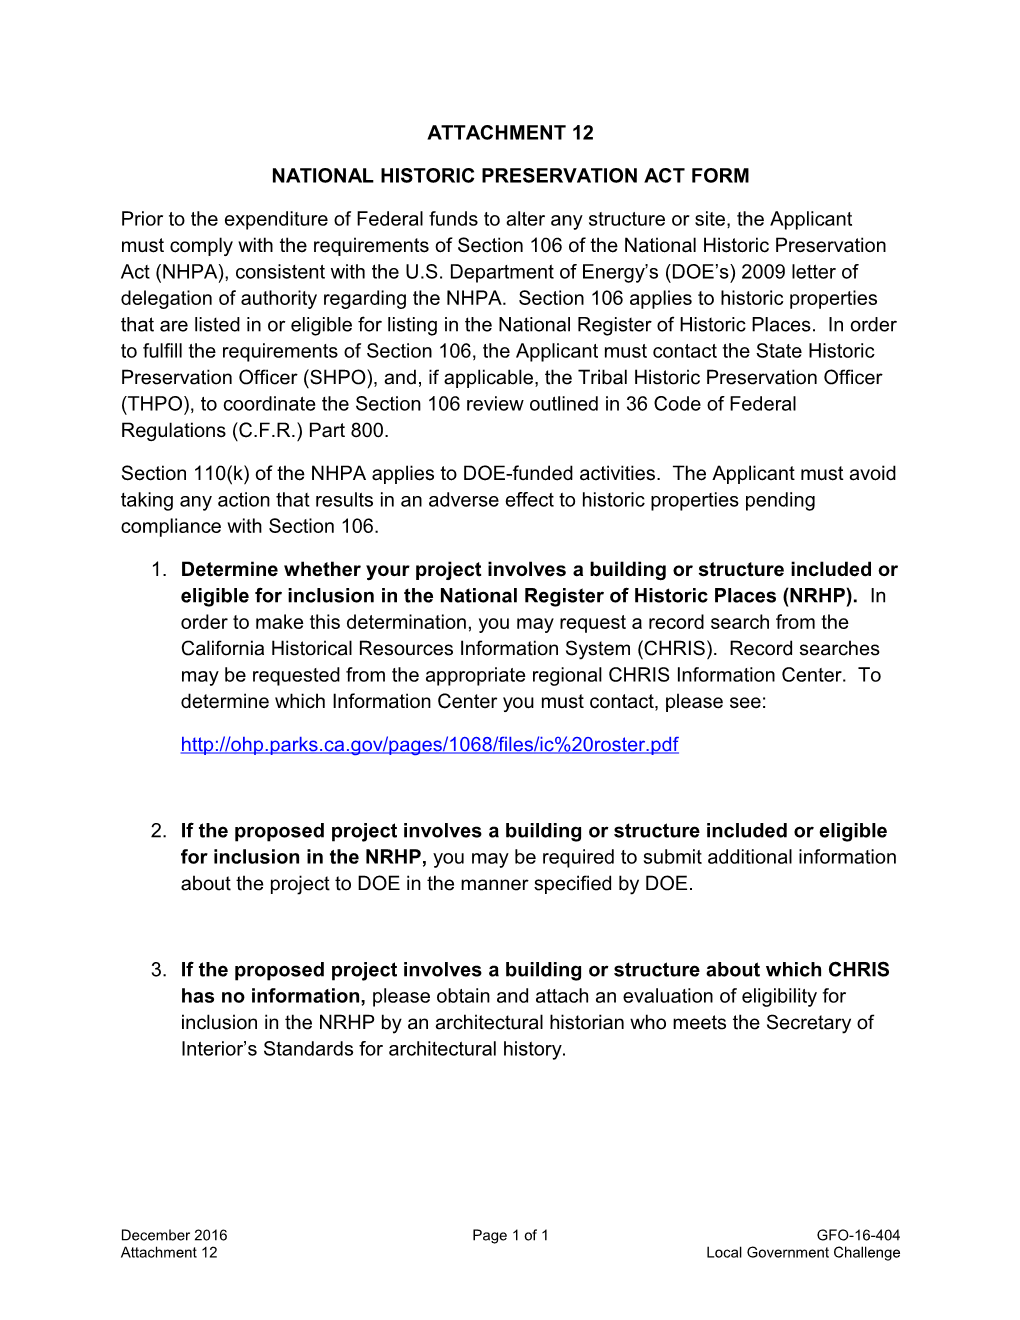 National Historic Preservation Act Form